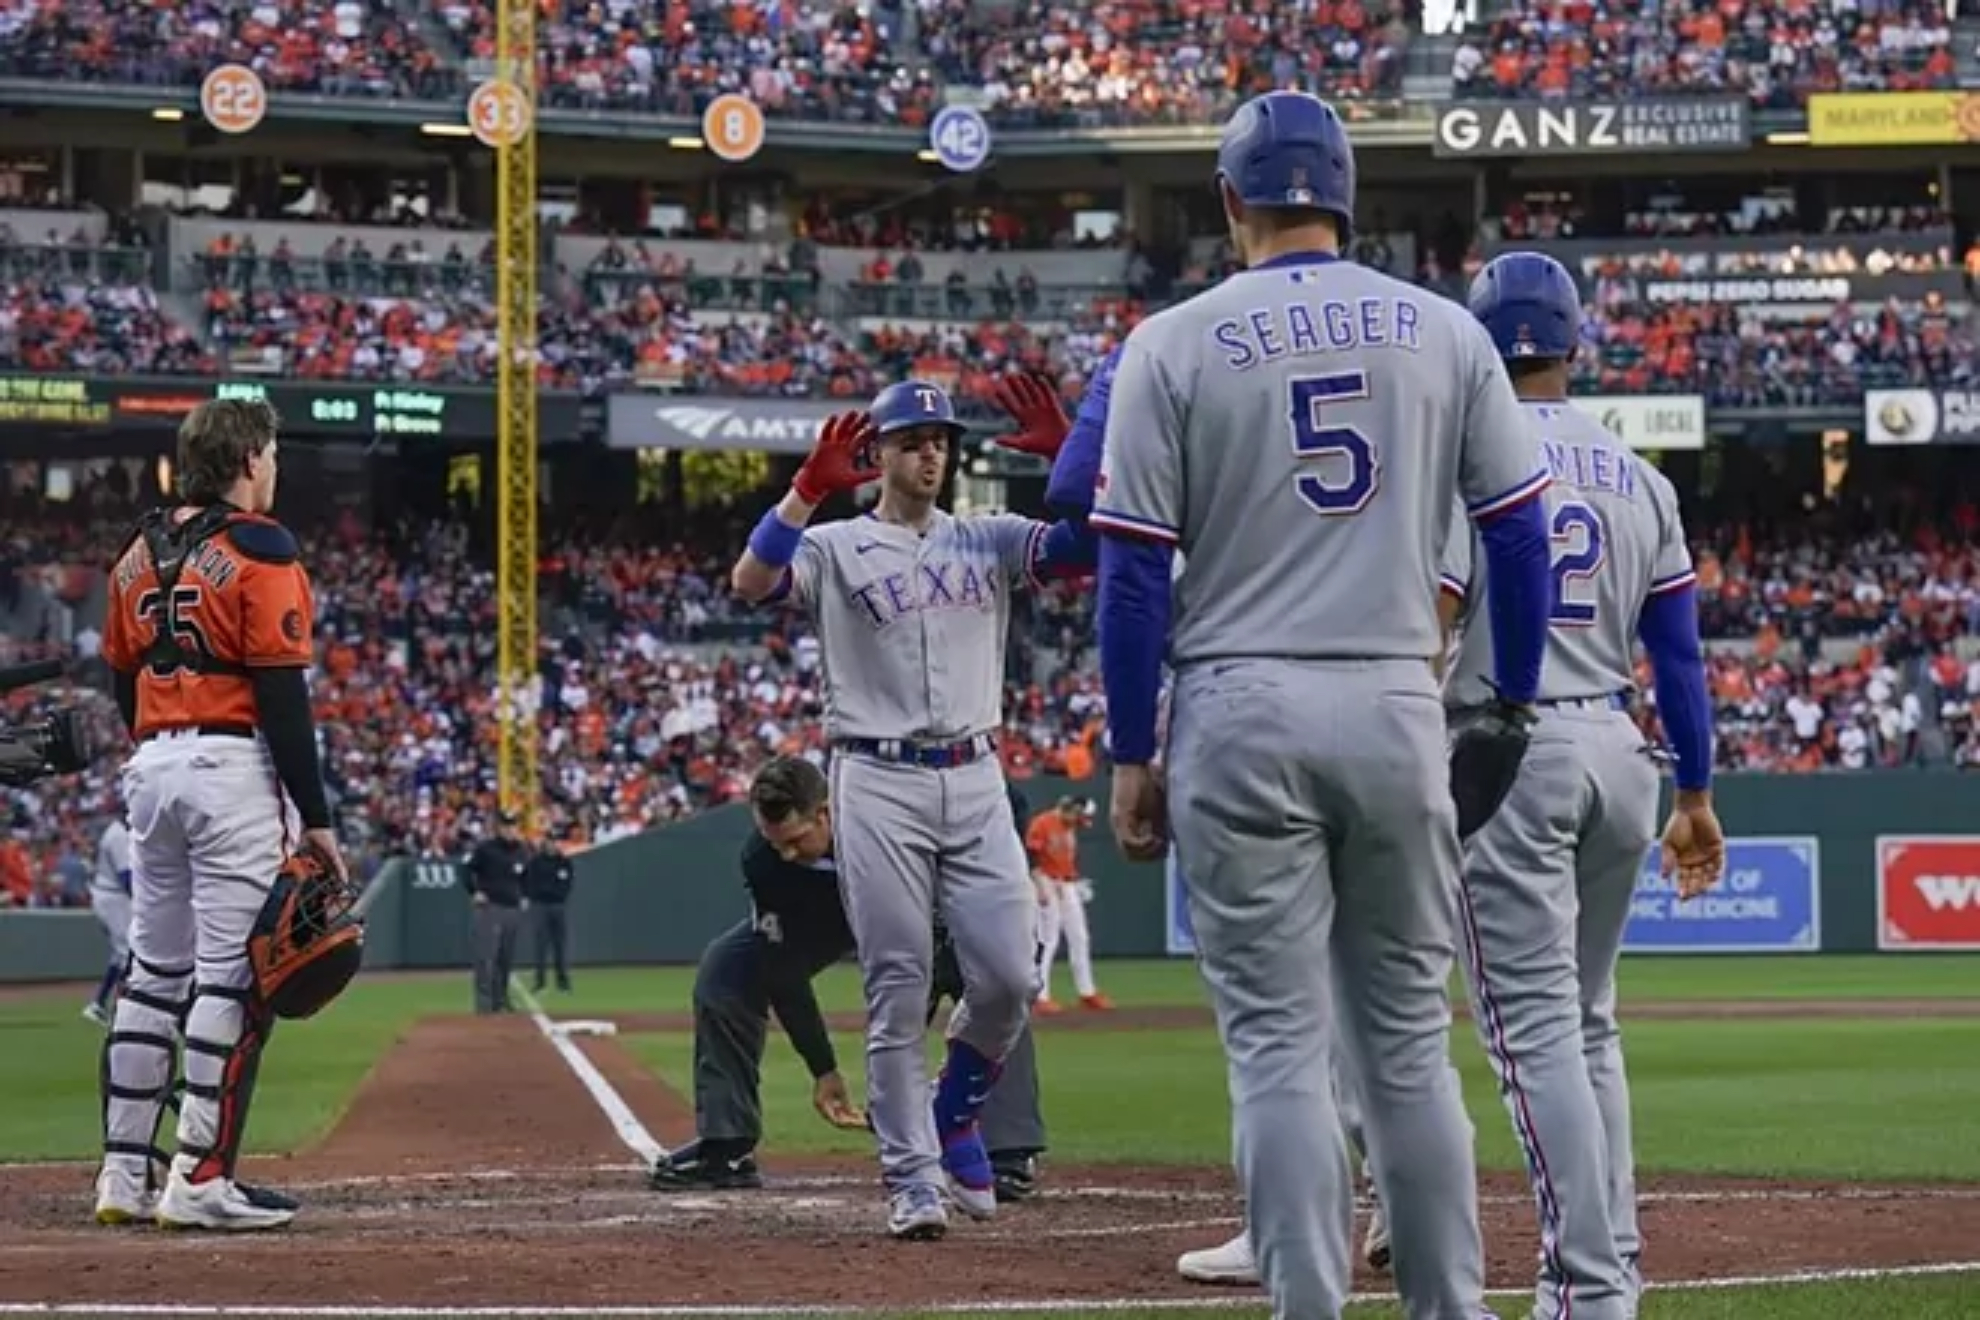 MLB Playoffs: Rangers dominate Orioles with Garvers impressive grand slam, head home with a 2-0 lead